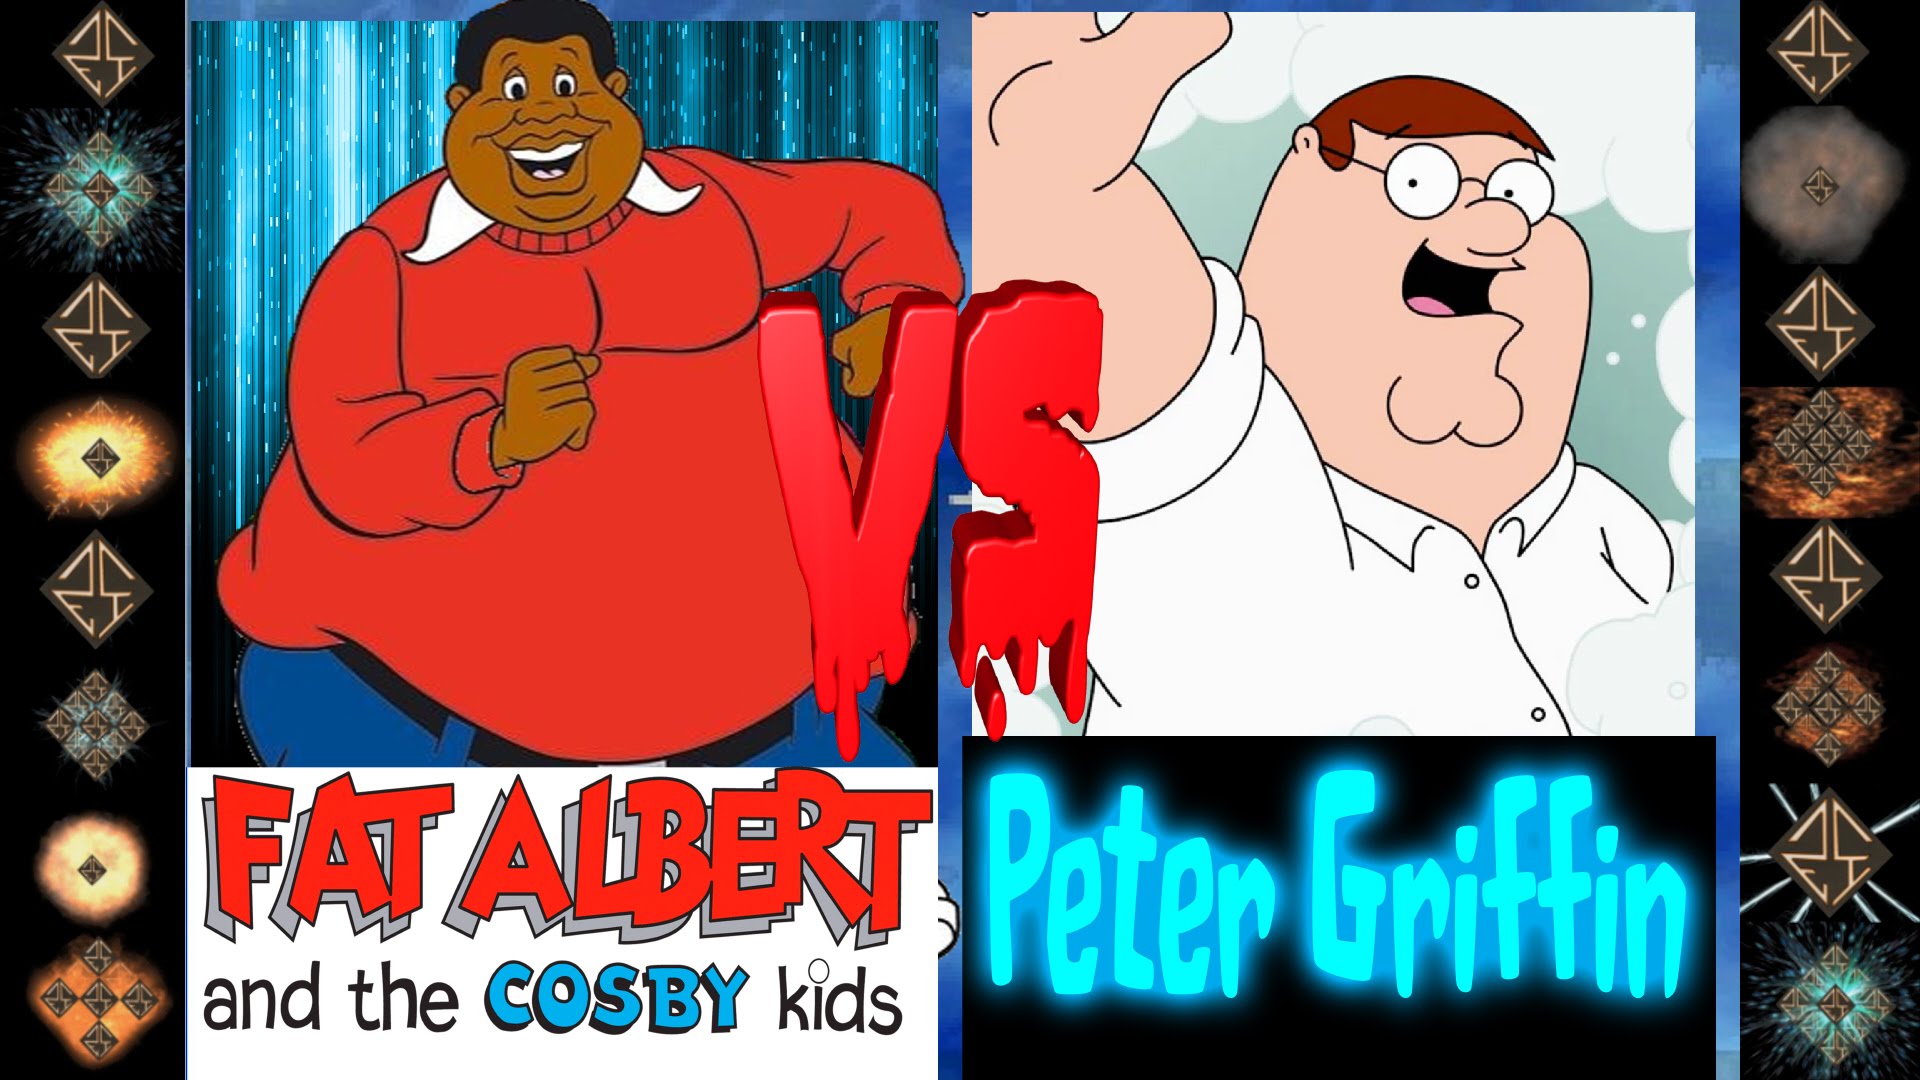 Fat Albert (Bill Cosby) vs Peter Griffin (Family Guy) - Ultimate ...